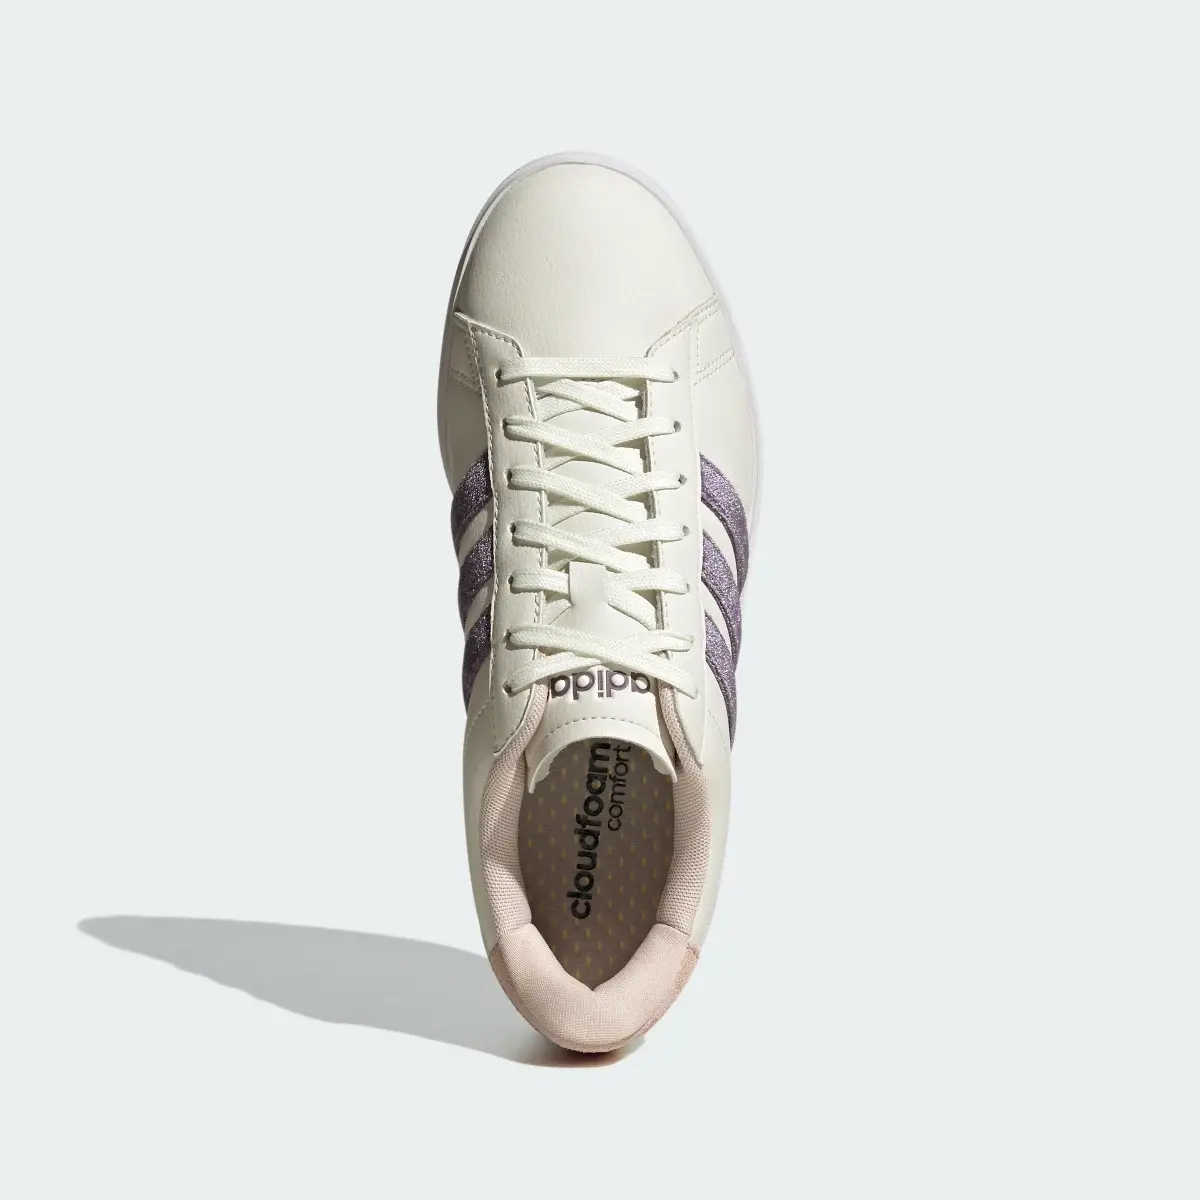 Adidas Grand Court 2.0 Shoes. 3